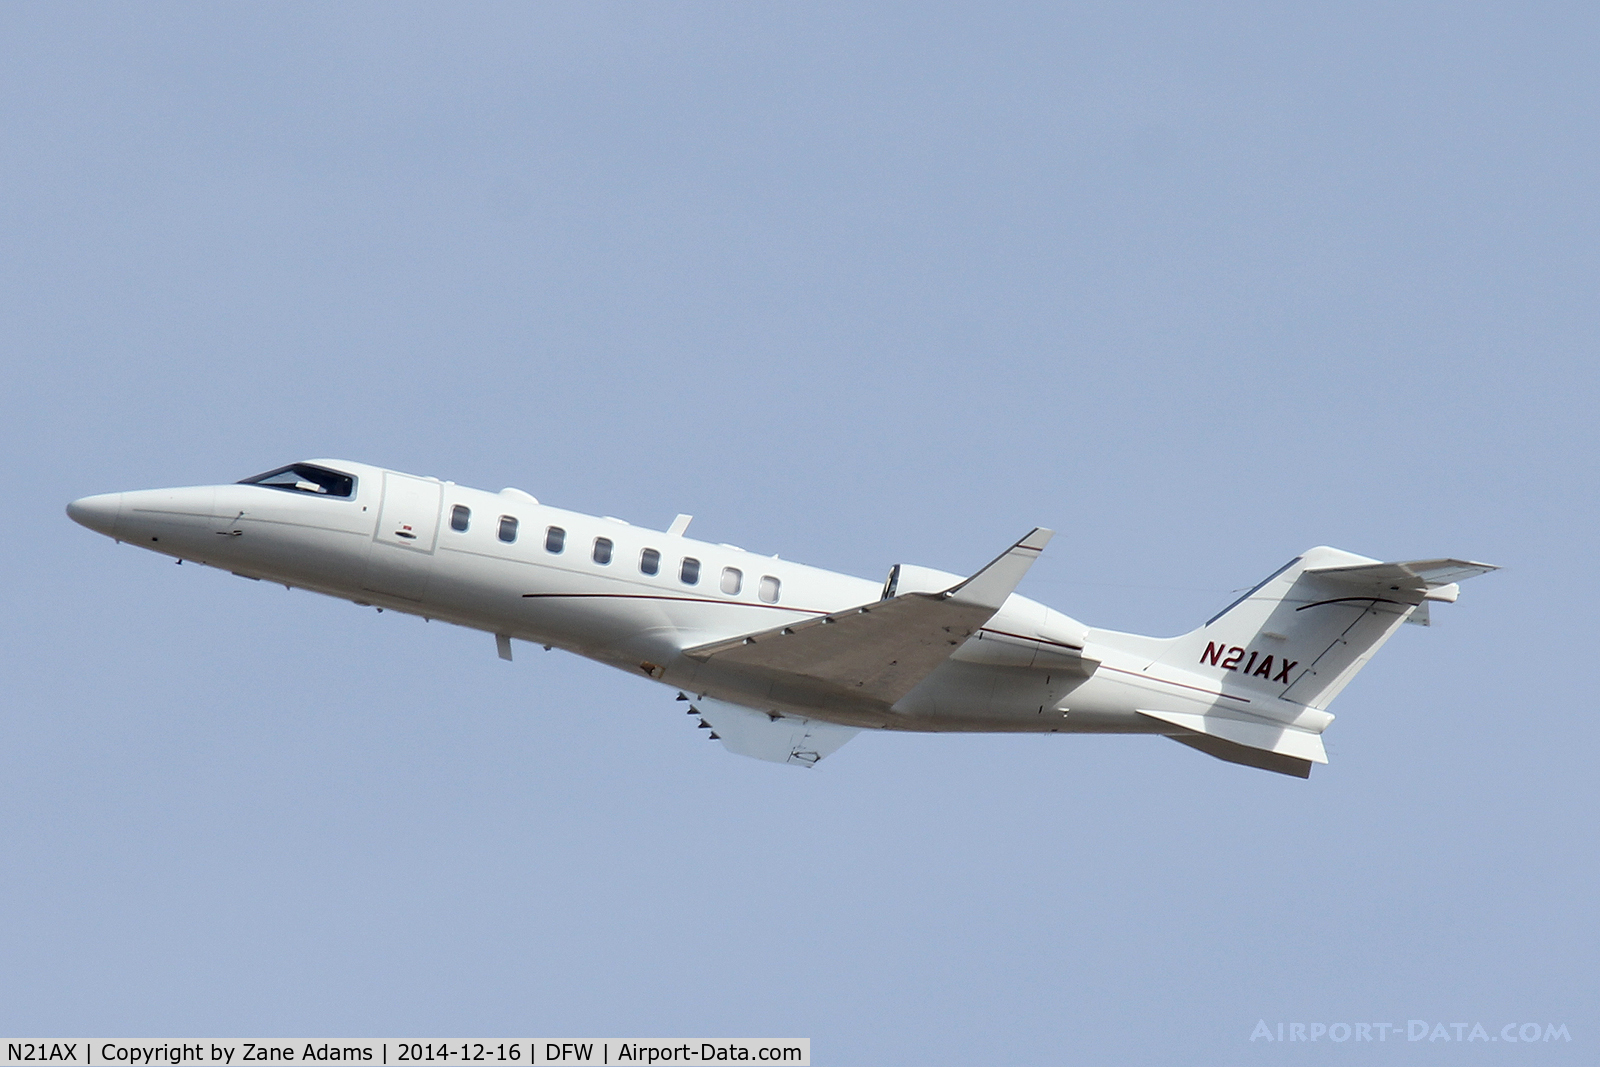 N21AX, 2001 Learjet 45 C/N 123, At DFW Airport